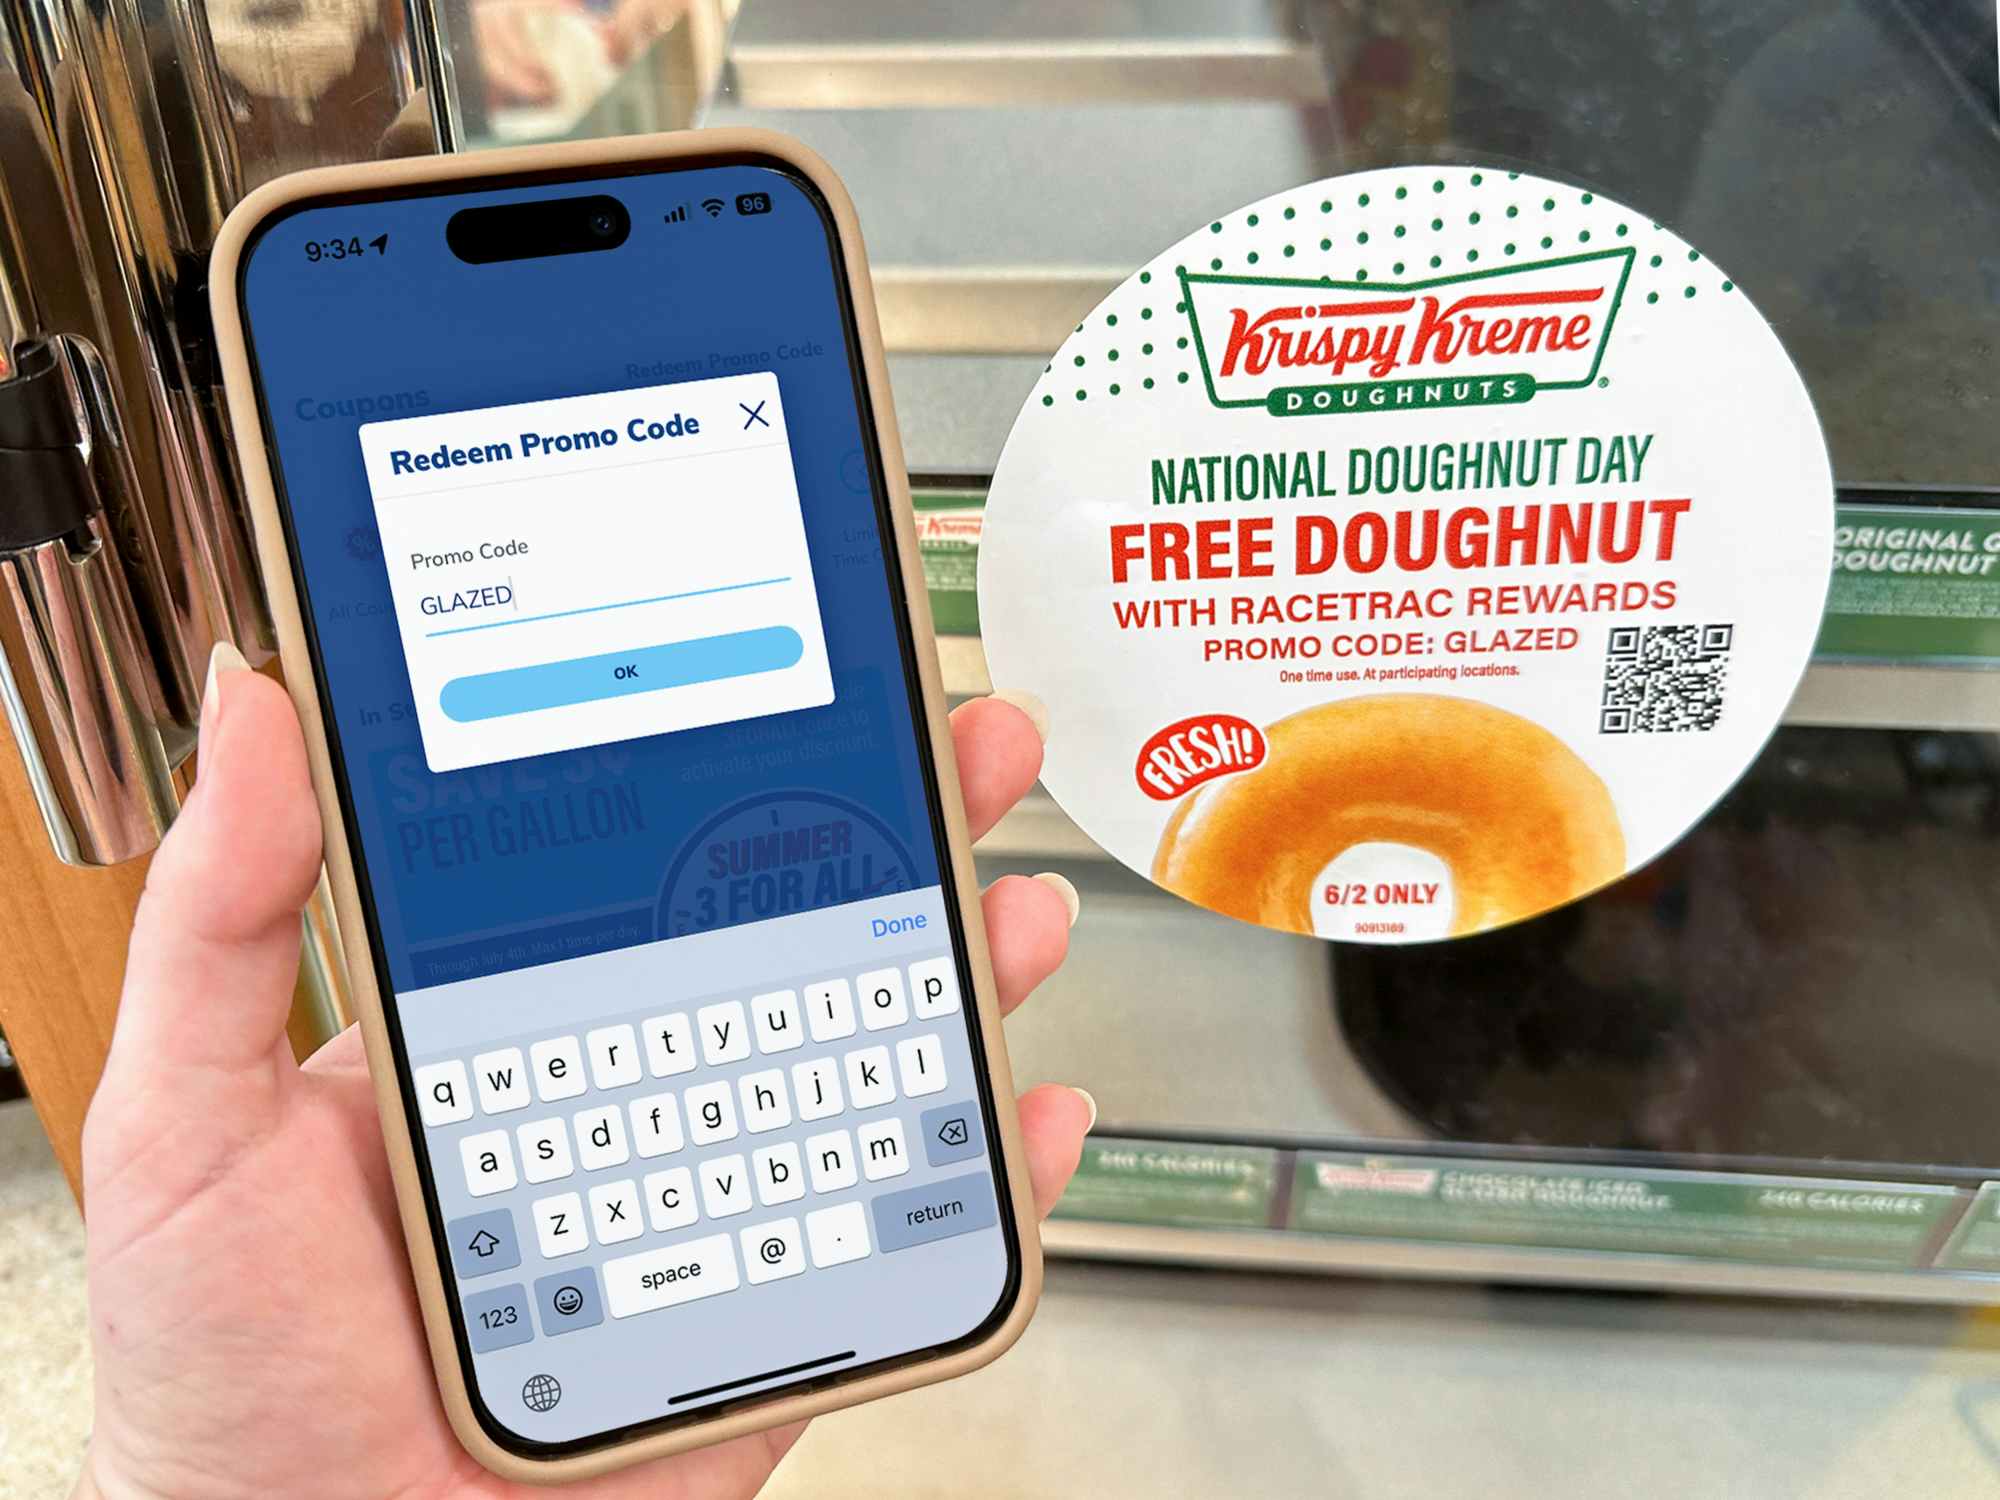 Someone holding a phone next to the RaceTrac Krispy Kreme donut display with a sign advertising the National Doughnut Day offer with the promo code GLAZED